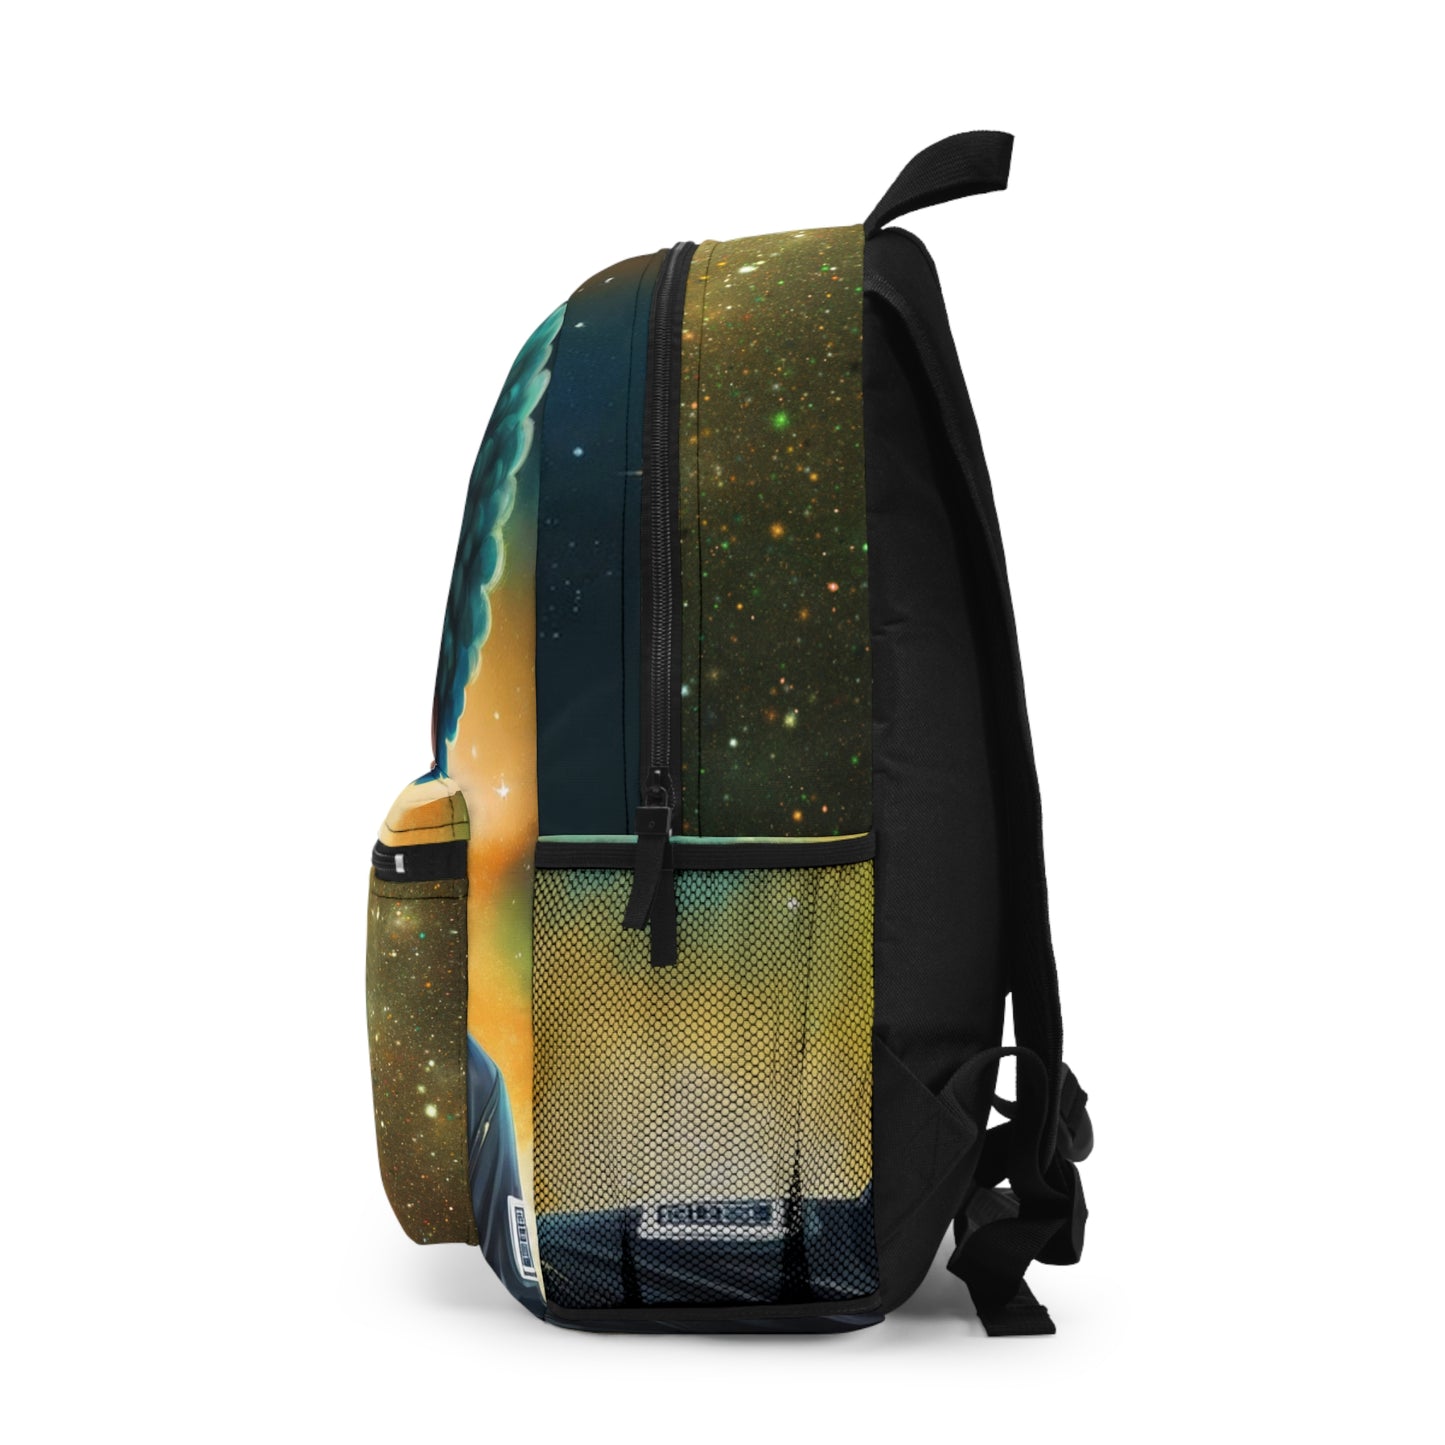 "Astro World" Backpack